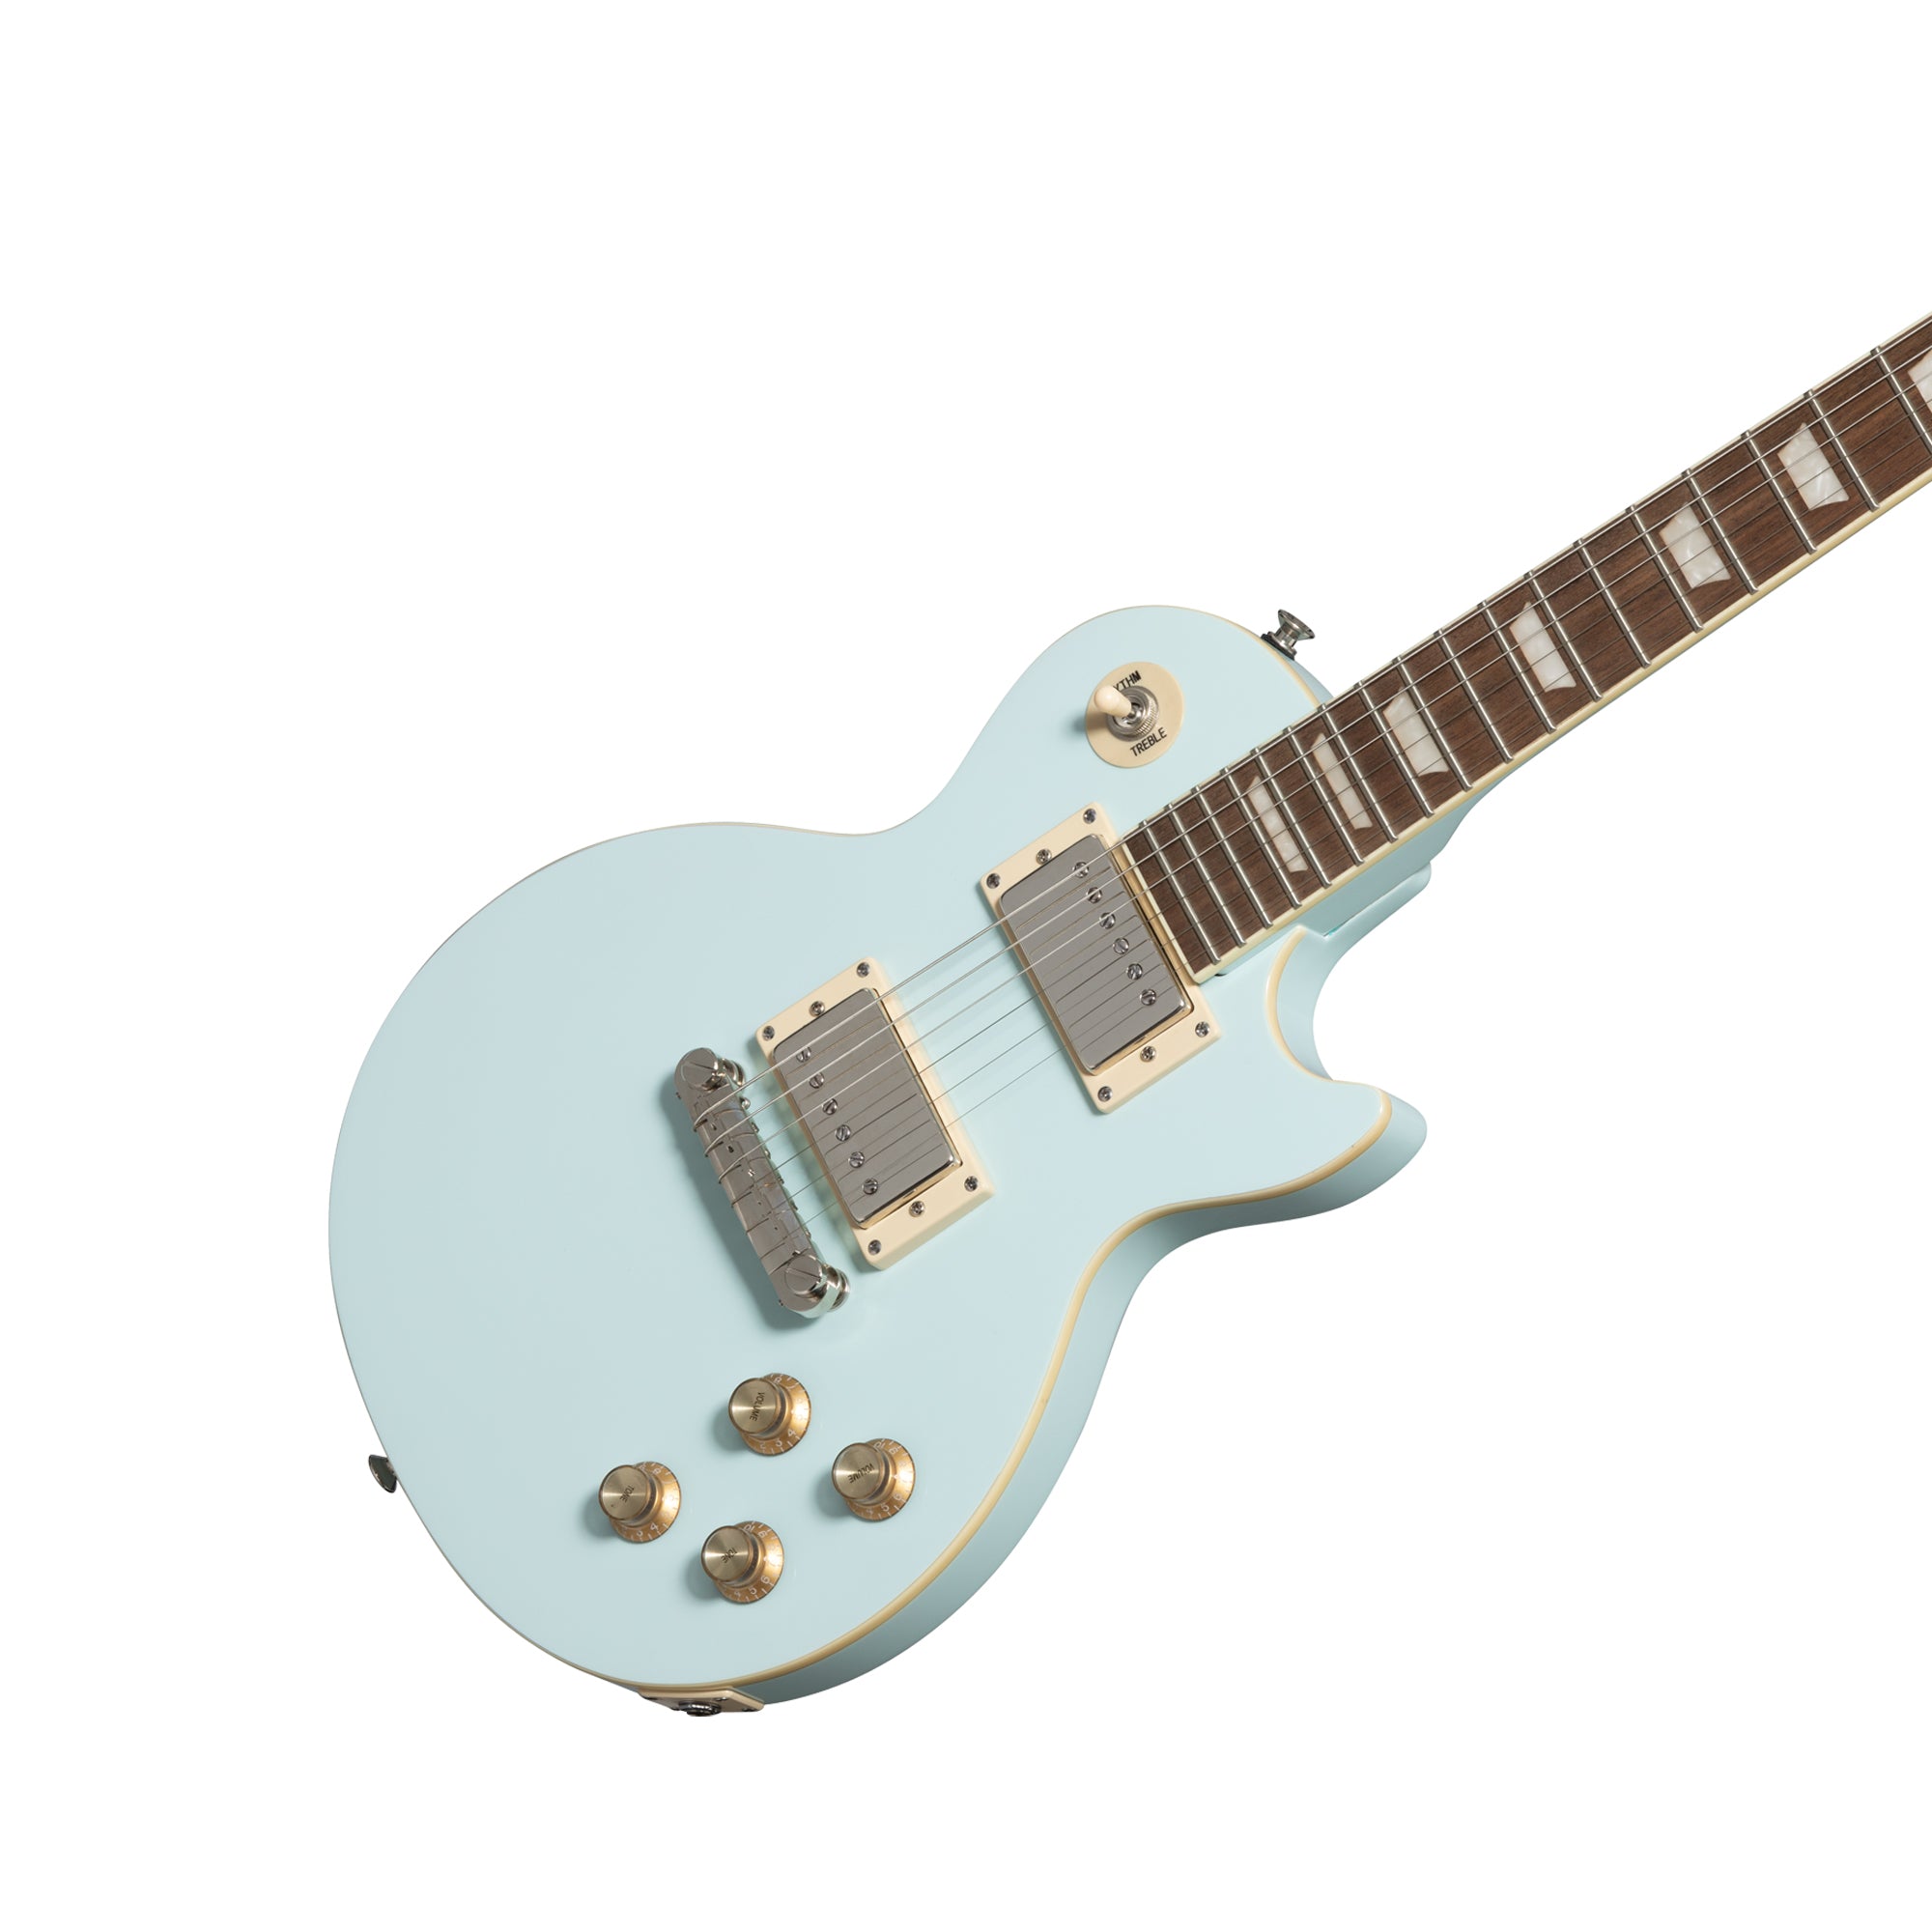 Epiphone ES1PPLPFBNH1 Power Players Les Paul Ice Blue - Incl. Gig bag, Cable, Picks